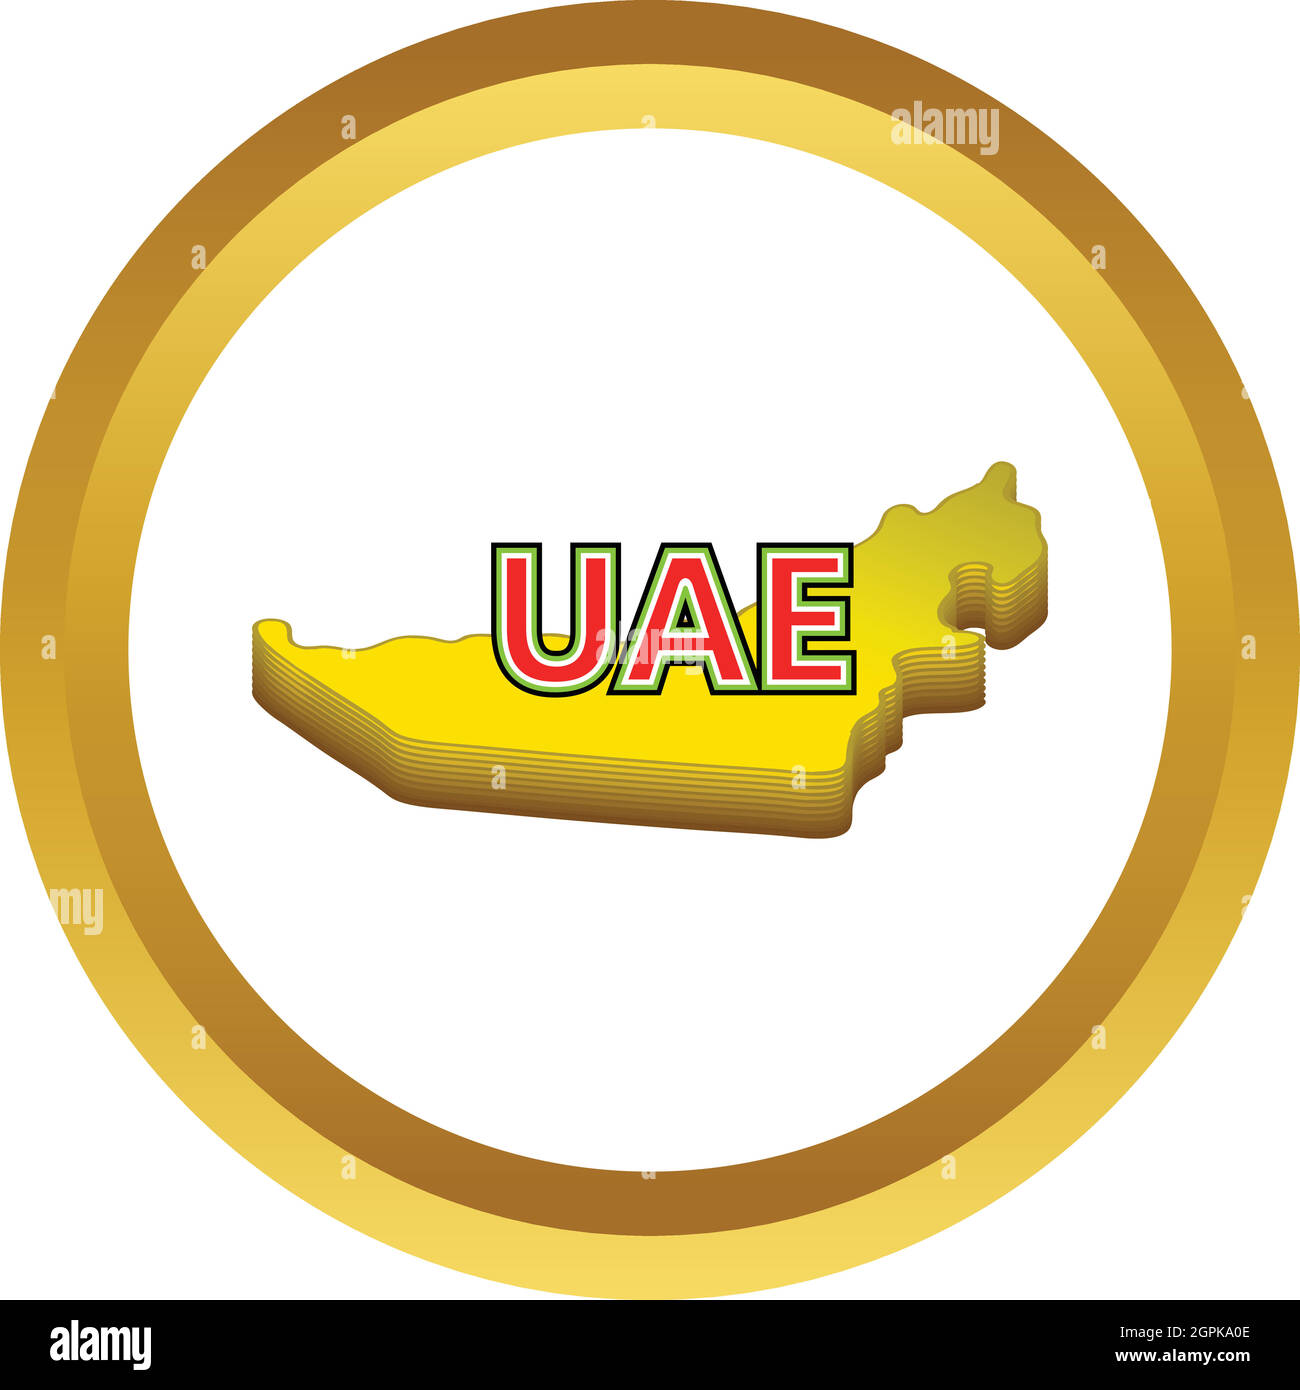 Map of UAE vector icon Stock Vector